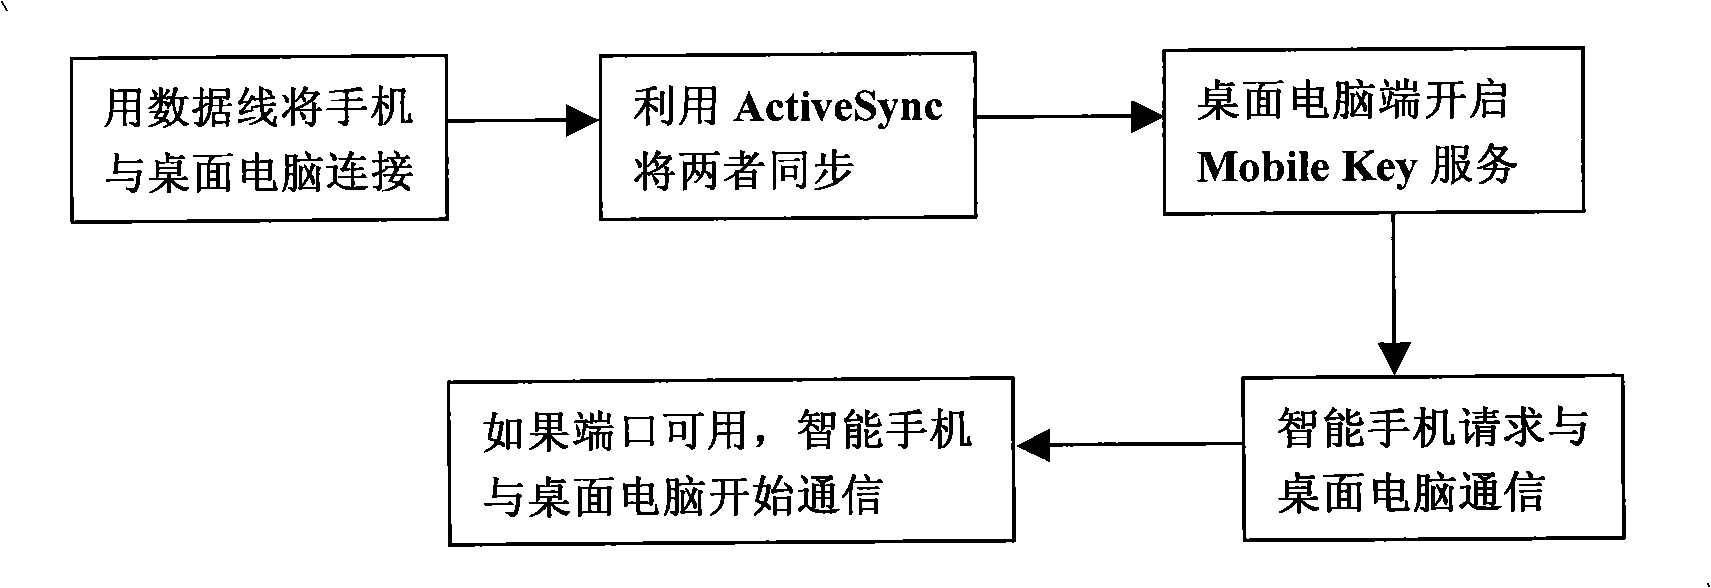 Mobile authentication system based on intelligent mobile phone